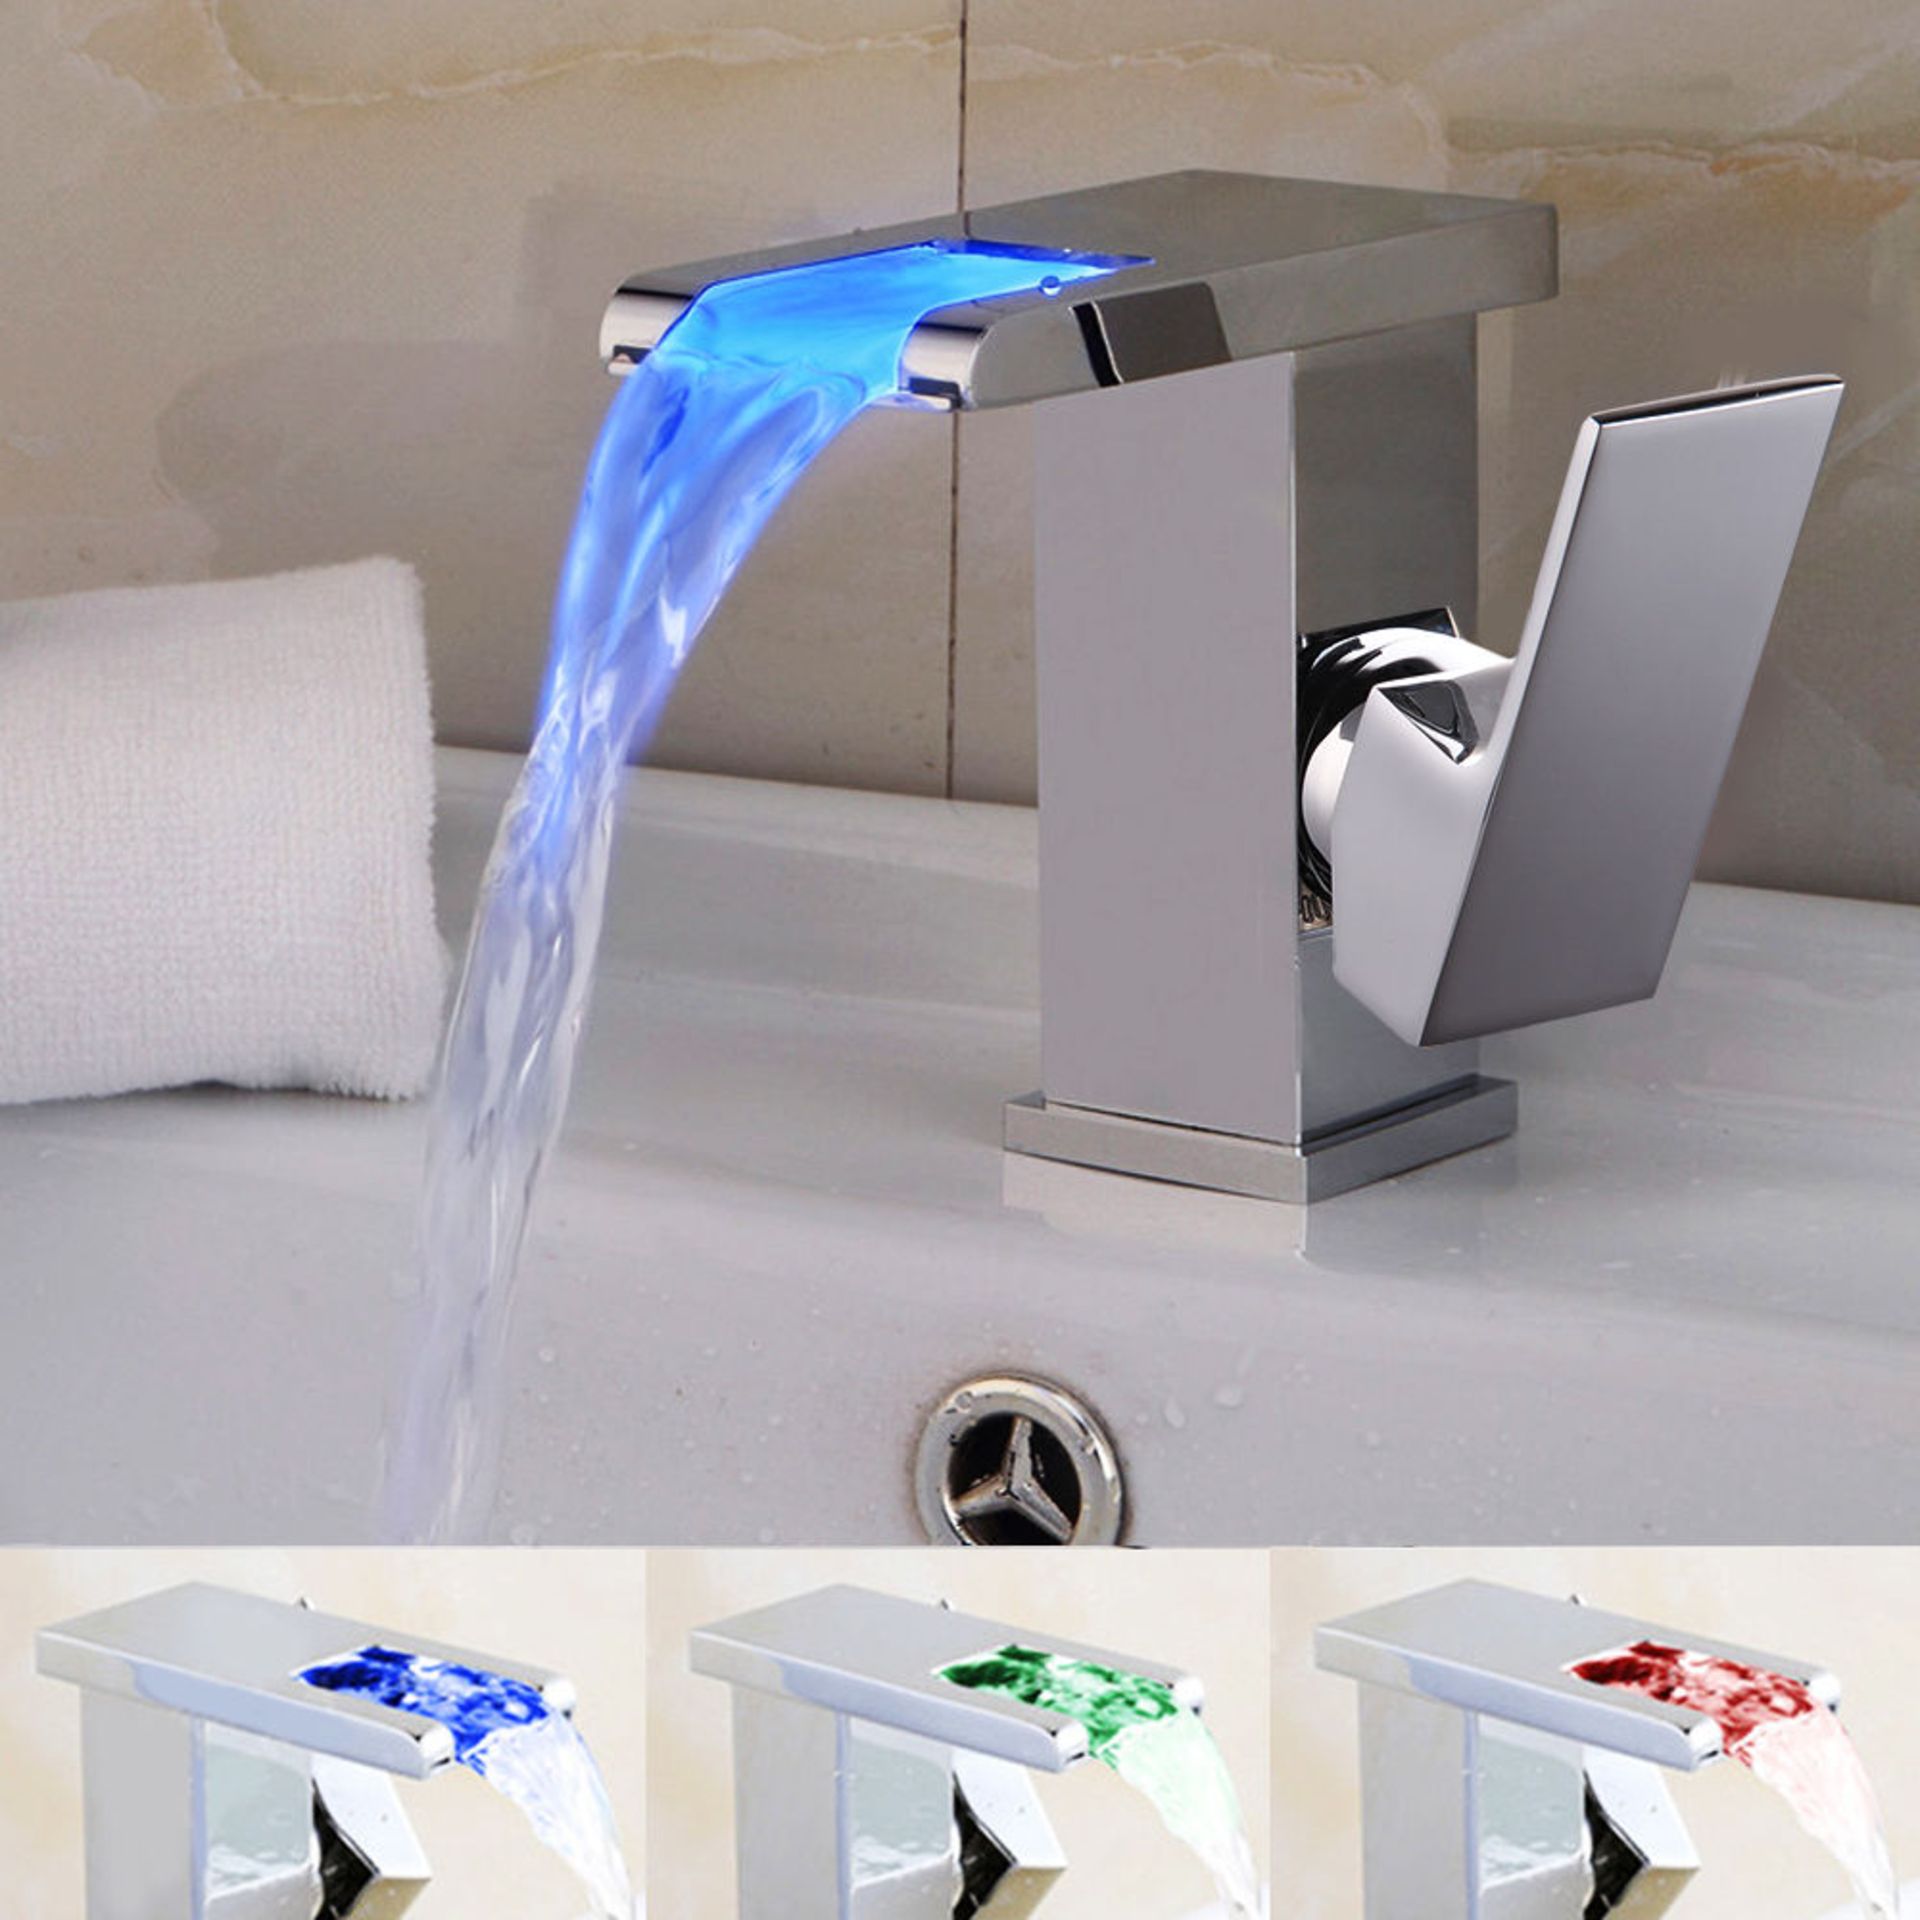 (J198) LED Waterfall Bathroom Basin Mixer Tap. RRP £229.99. Easy to install and clean. All copper